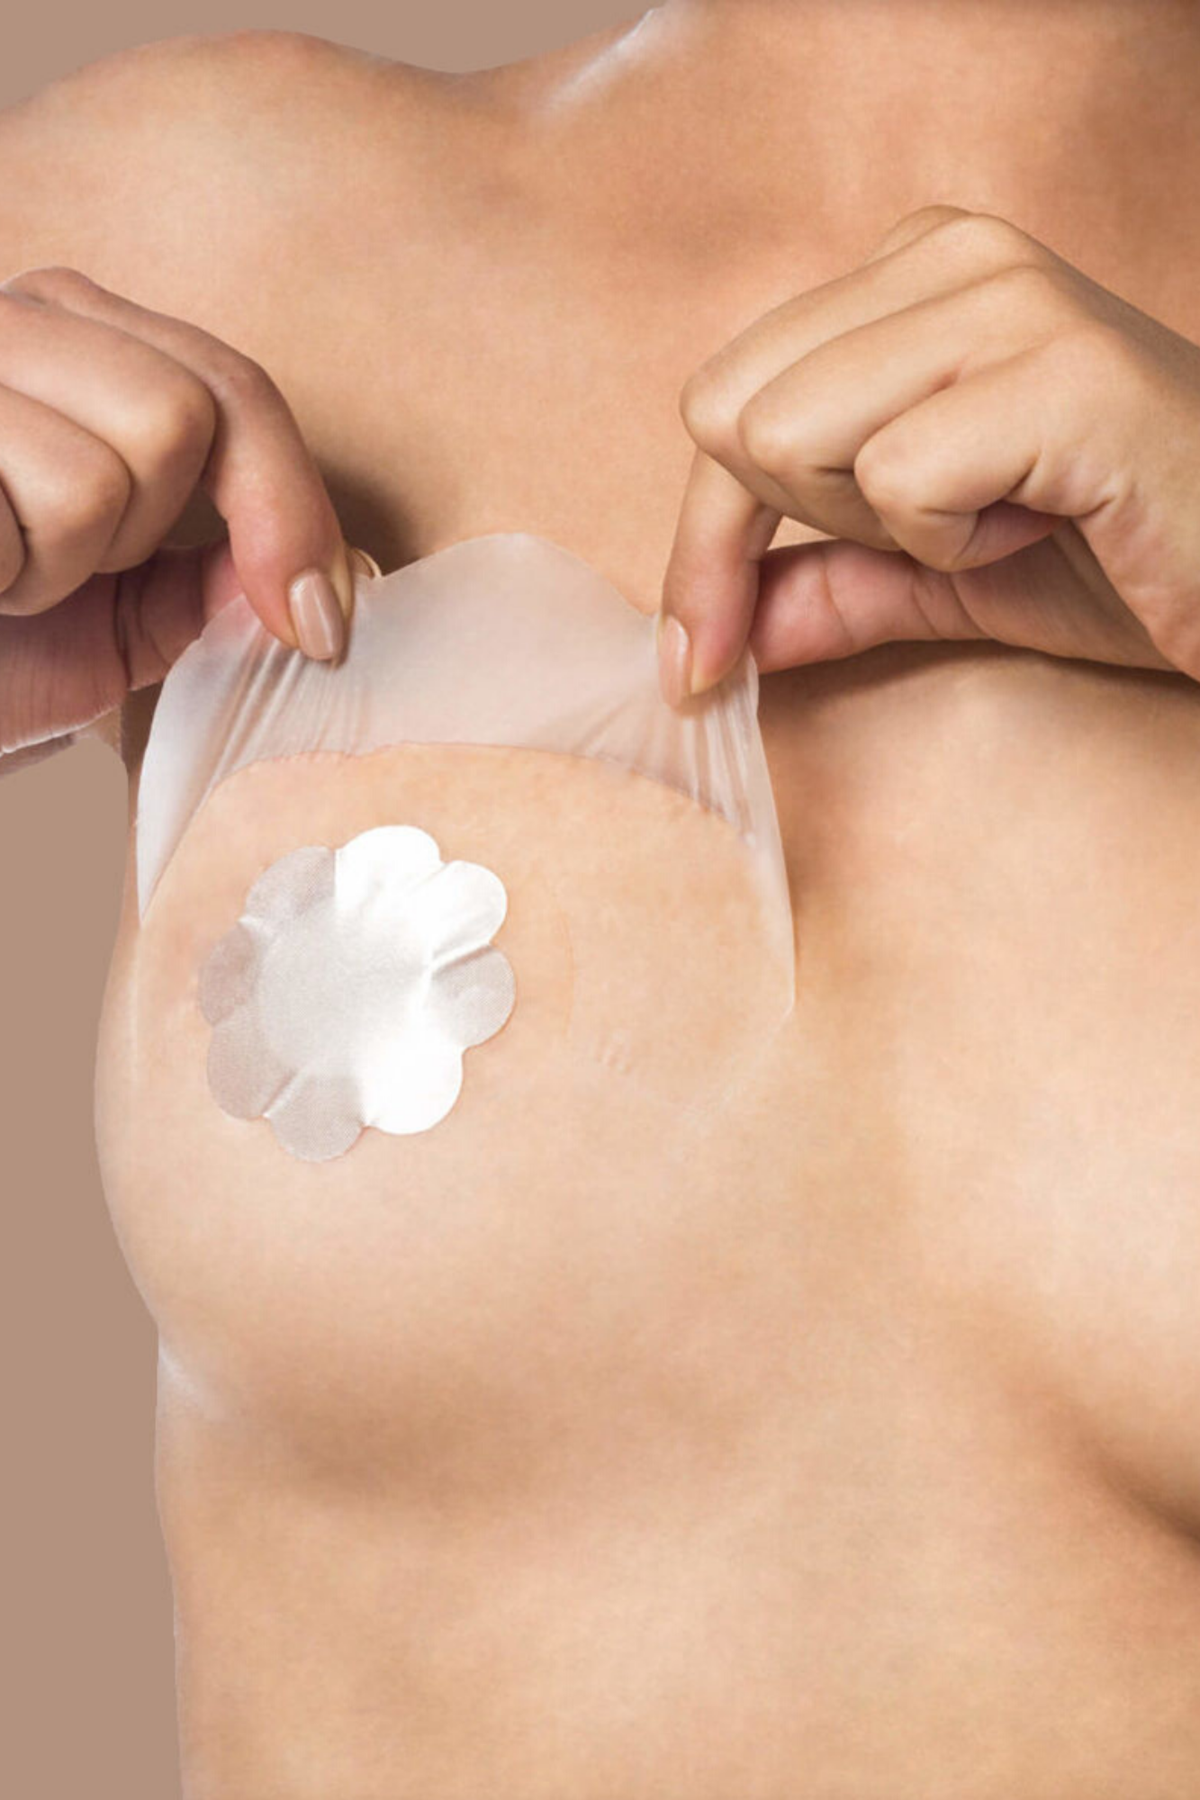 Lift up breast tape with satin nipple covers – Pretty Things™